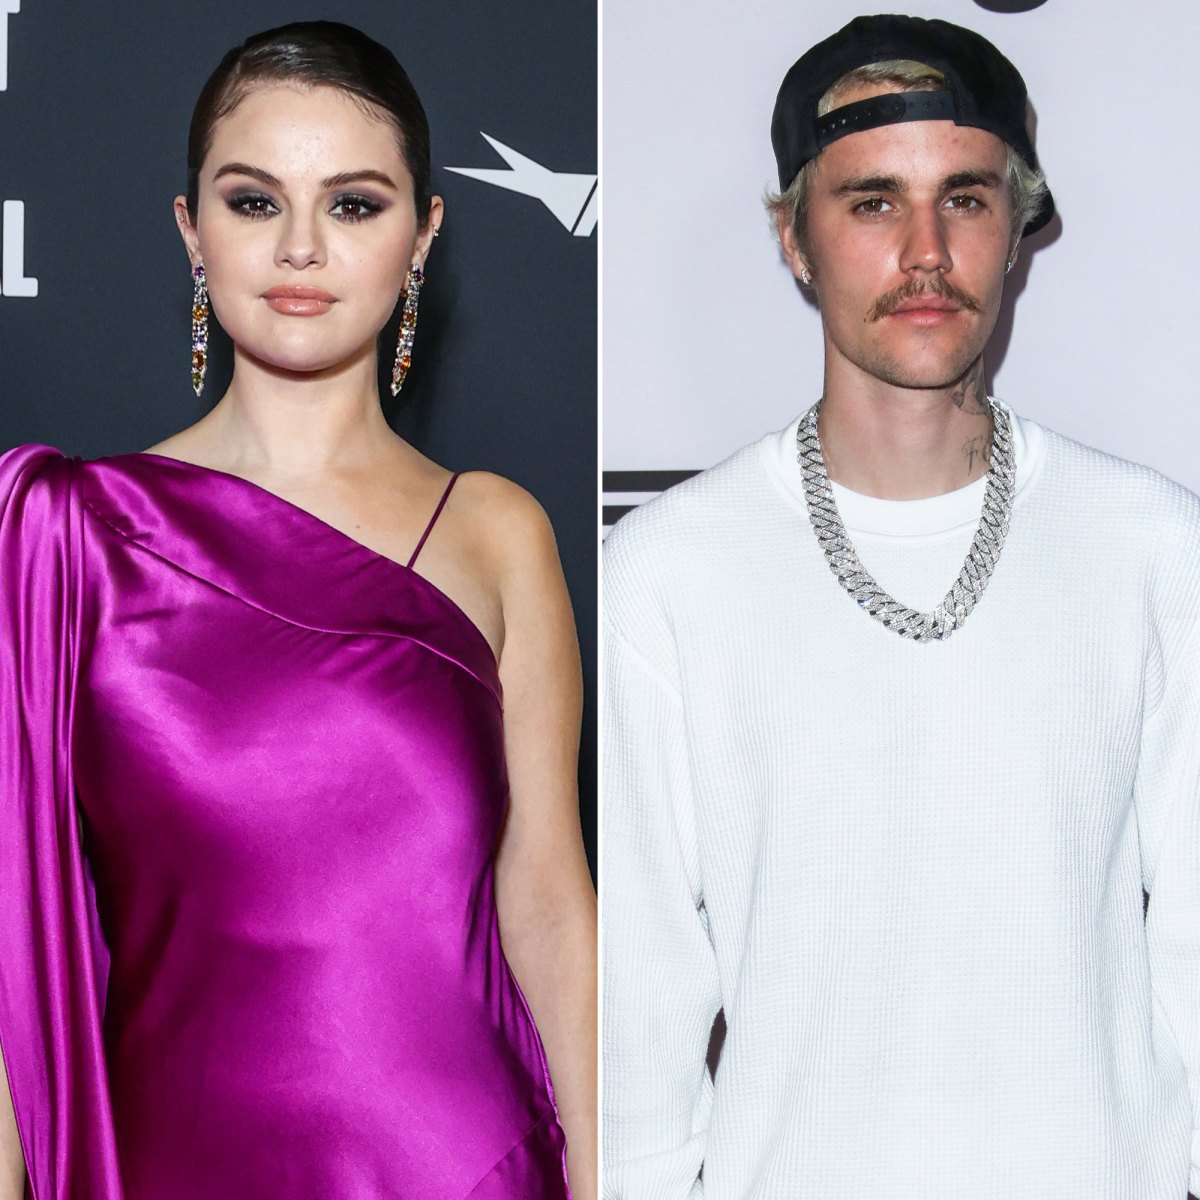 amplitude Bolt stemning Selena Gomez: A Fan 'Made Me Cry' After Acknowledging My Hardships